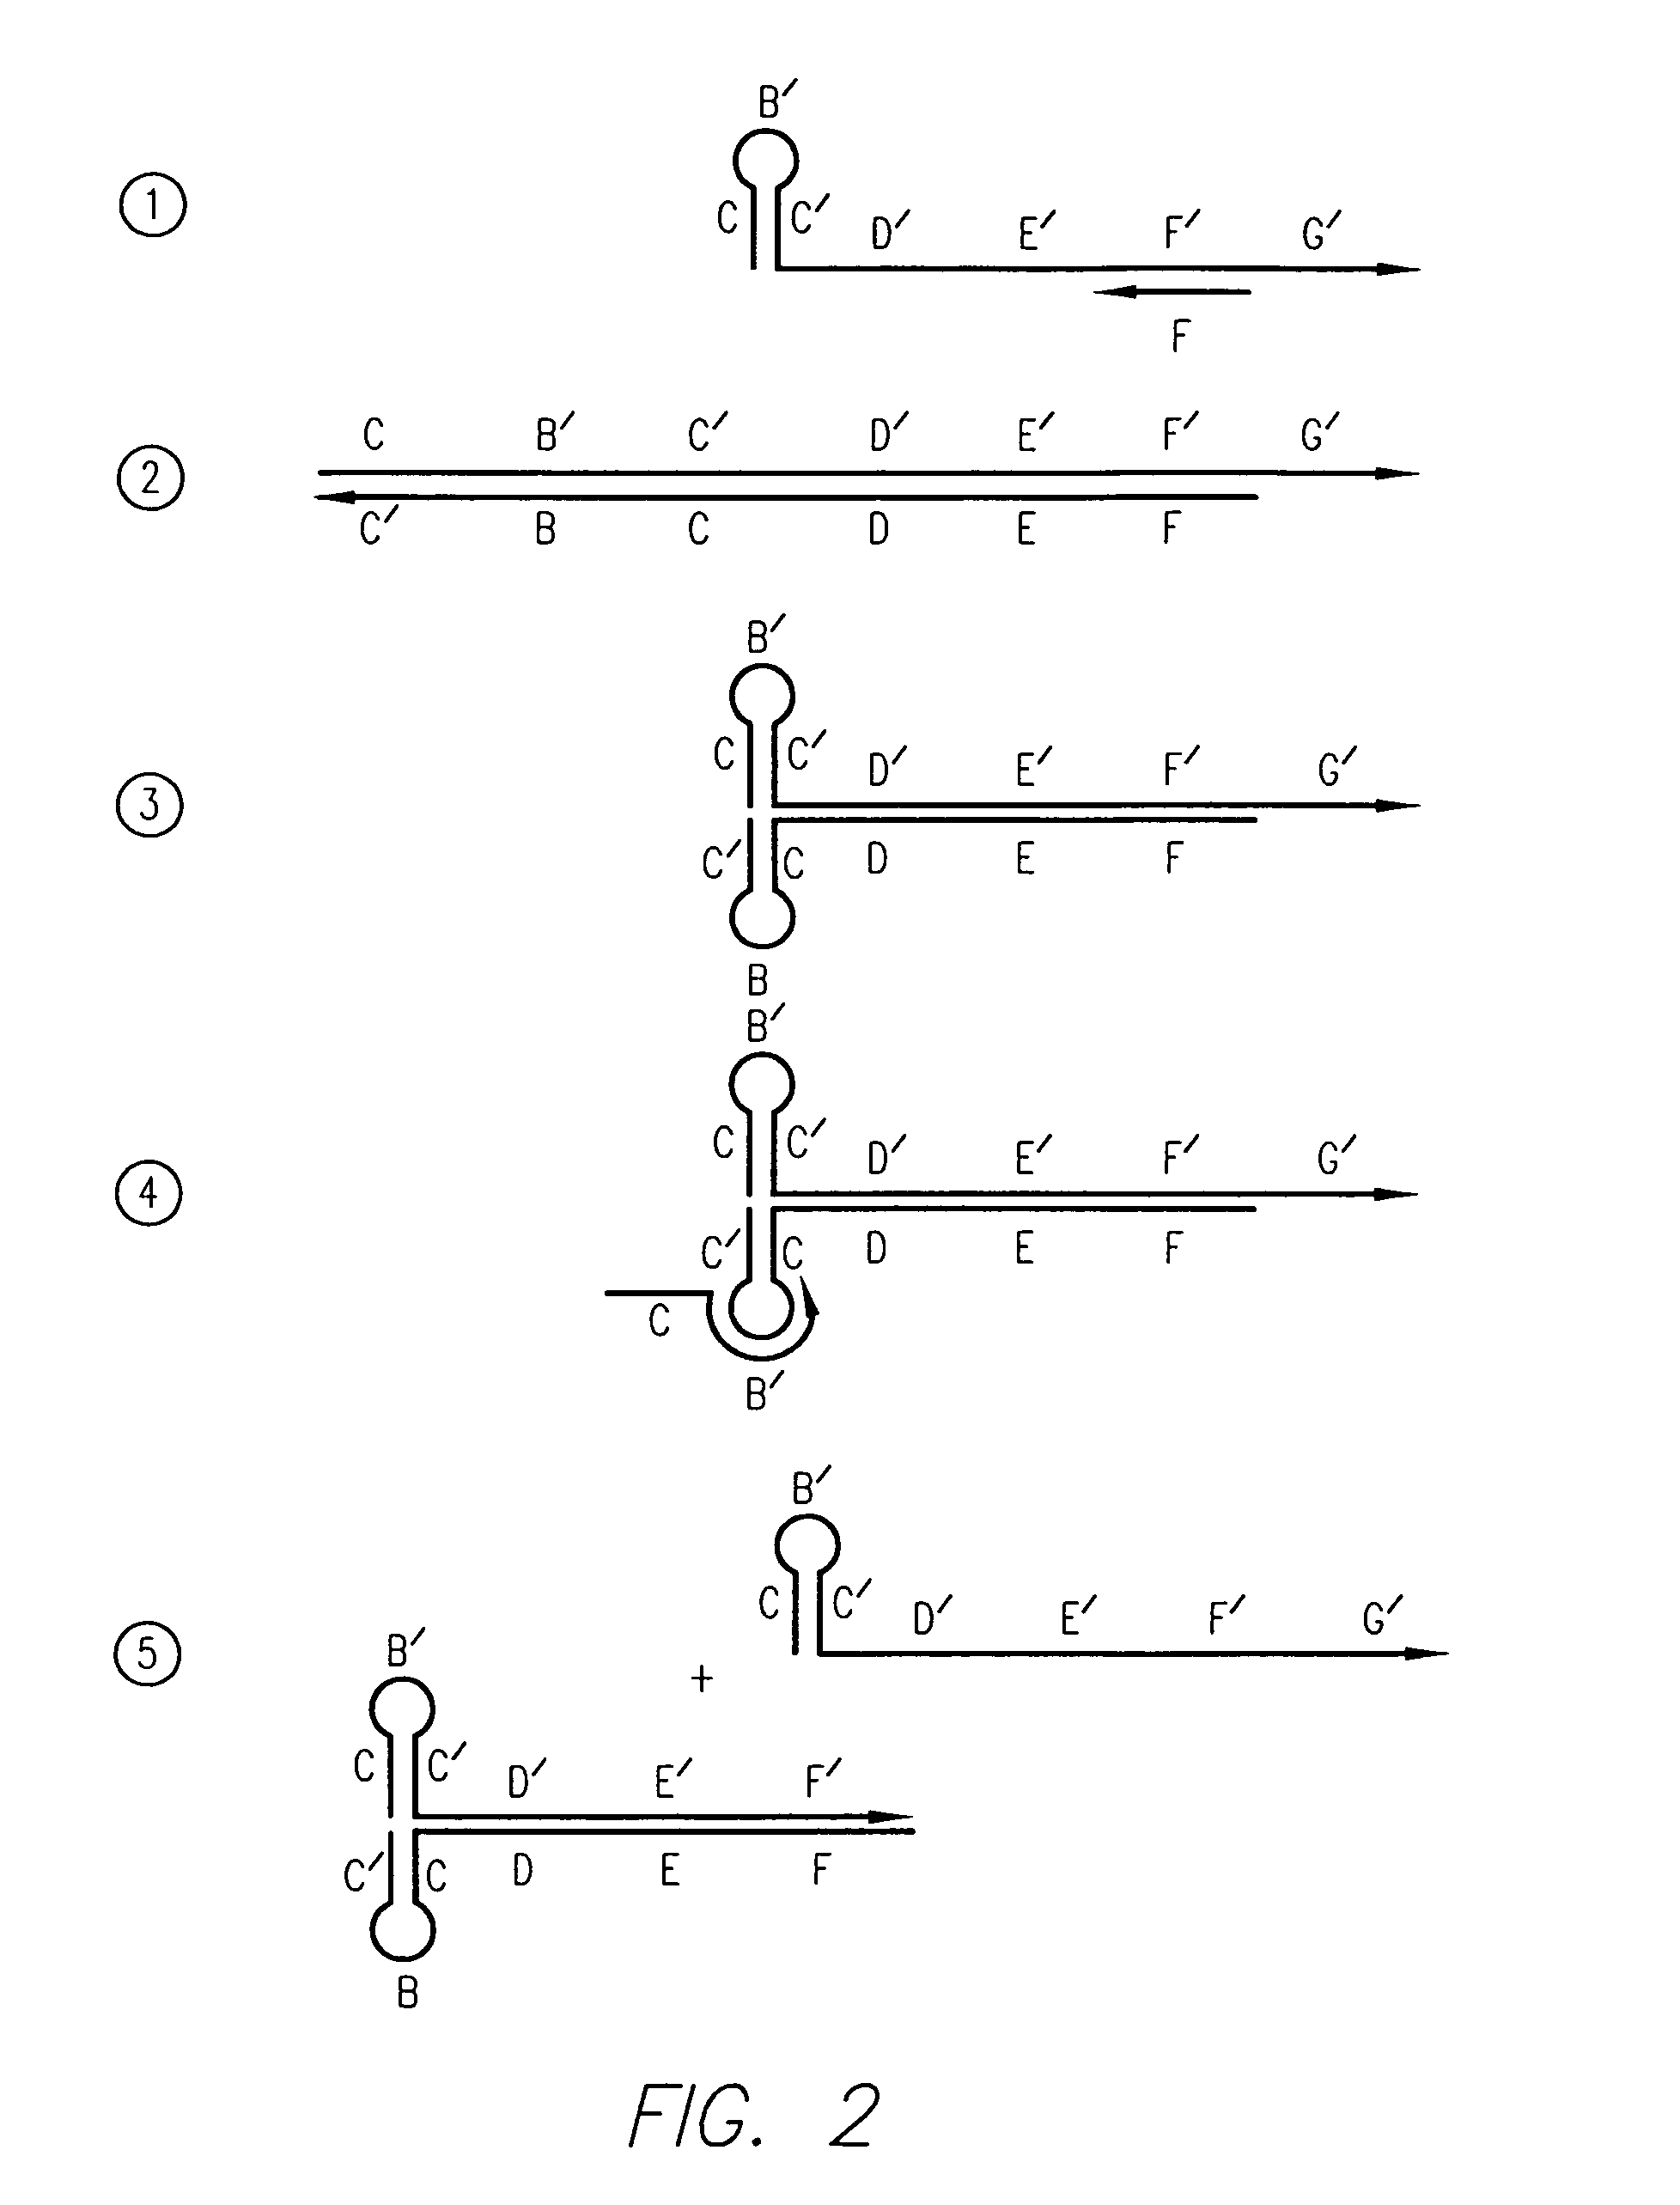 Kits for amplifying and detecting nucleic acid sequences